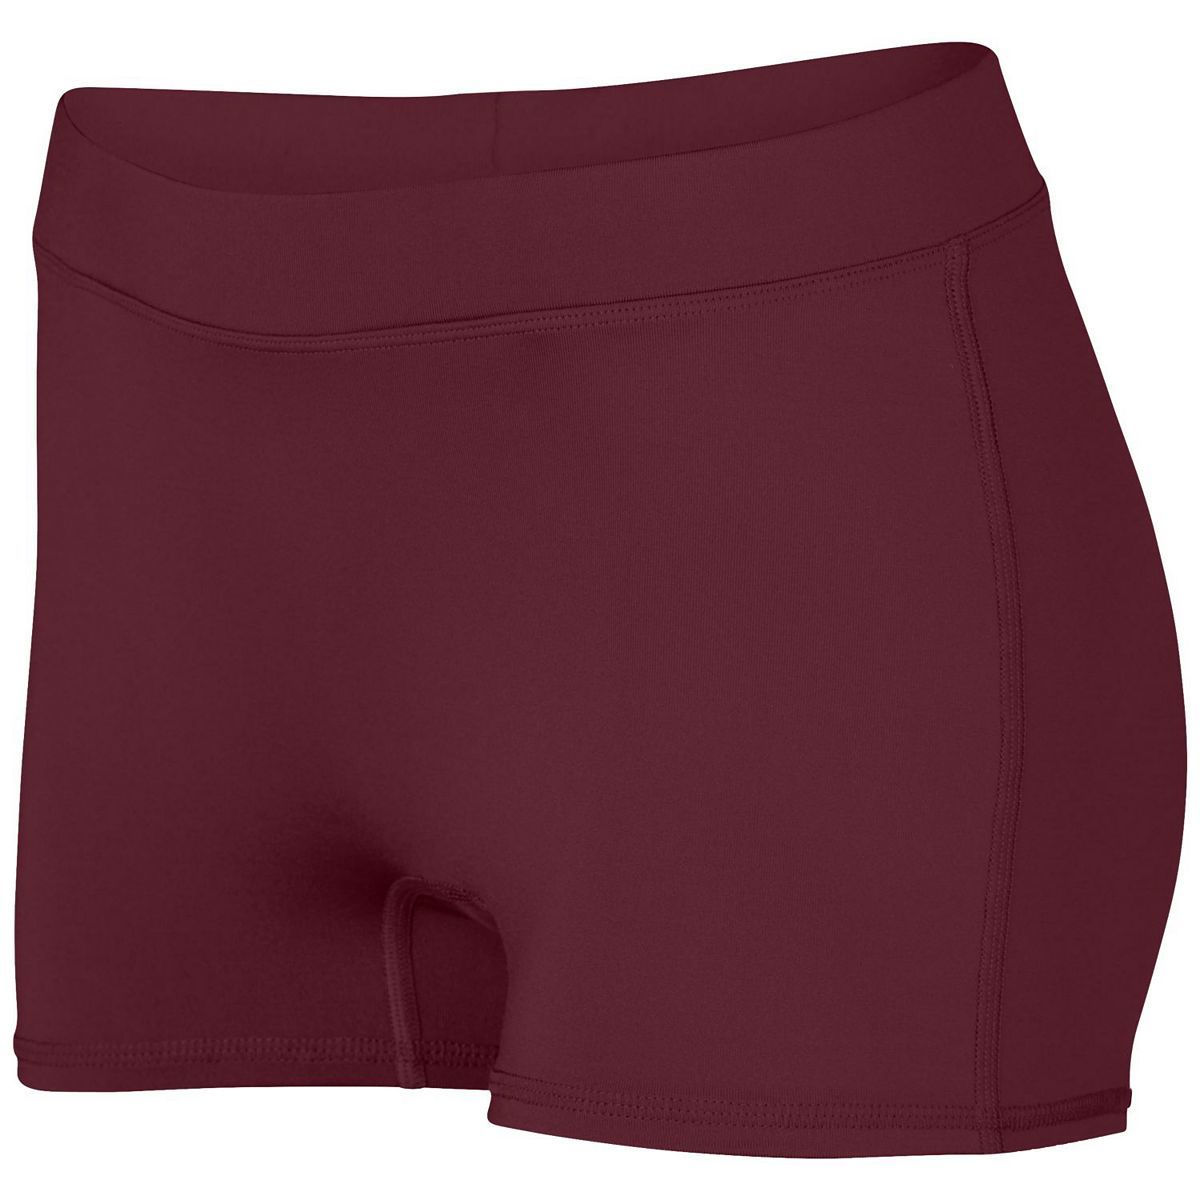 Augusta Sportswear Ladies Dare Shorts in Maroon  -Part of the Ladies, Ladies-Shorts, Augusta-Products, Volleyball product lines at KanaleyCreations.com